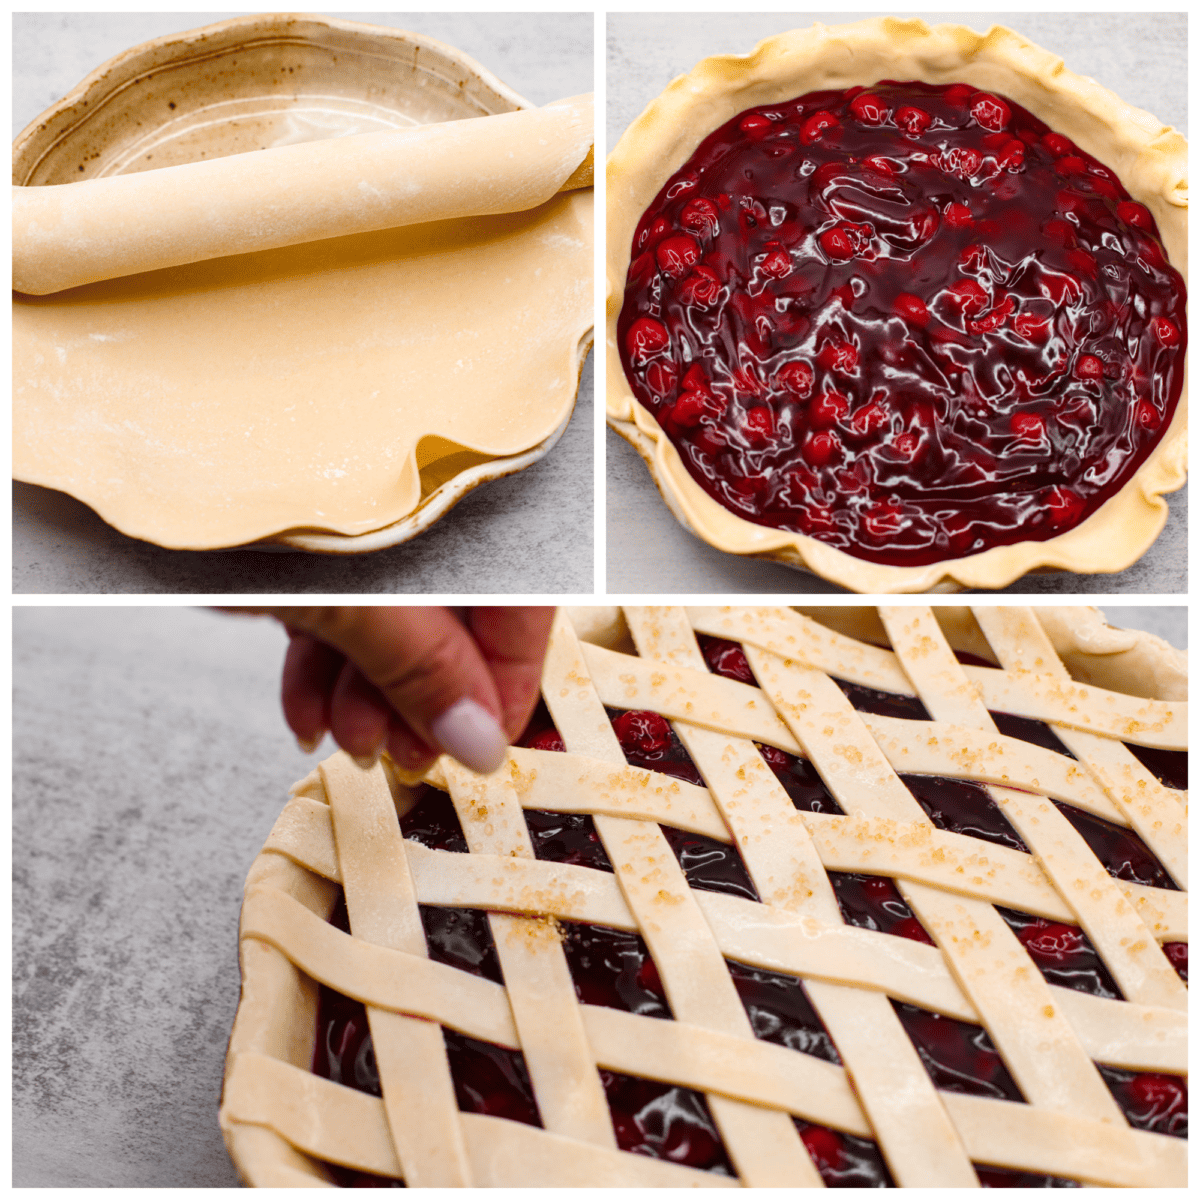 3-photo collage of an easy cherry pie being prepared. The crust is added to a pie pan, then filled with cherry filling and topped with a lattice crust.